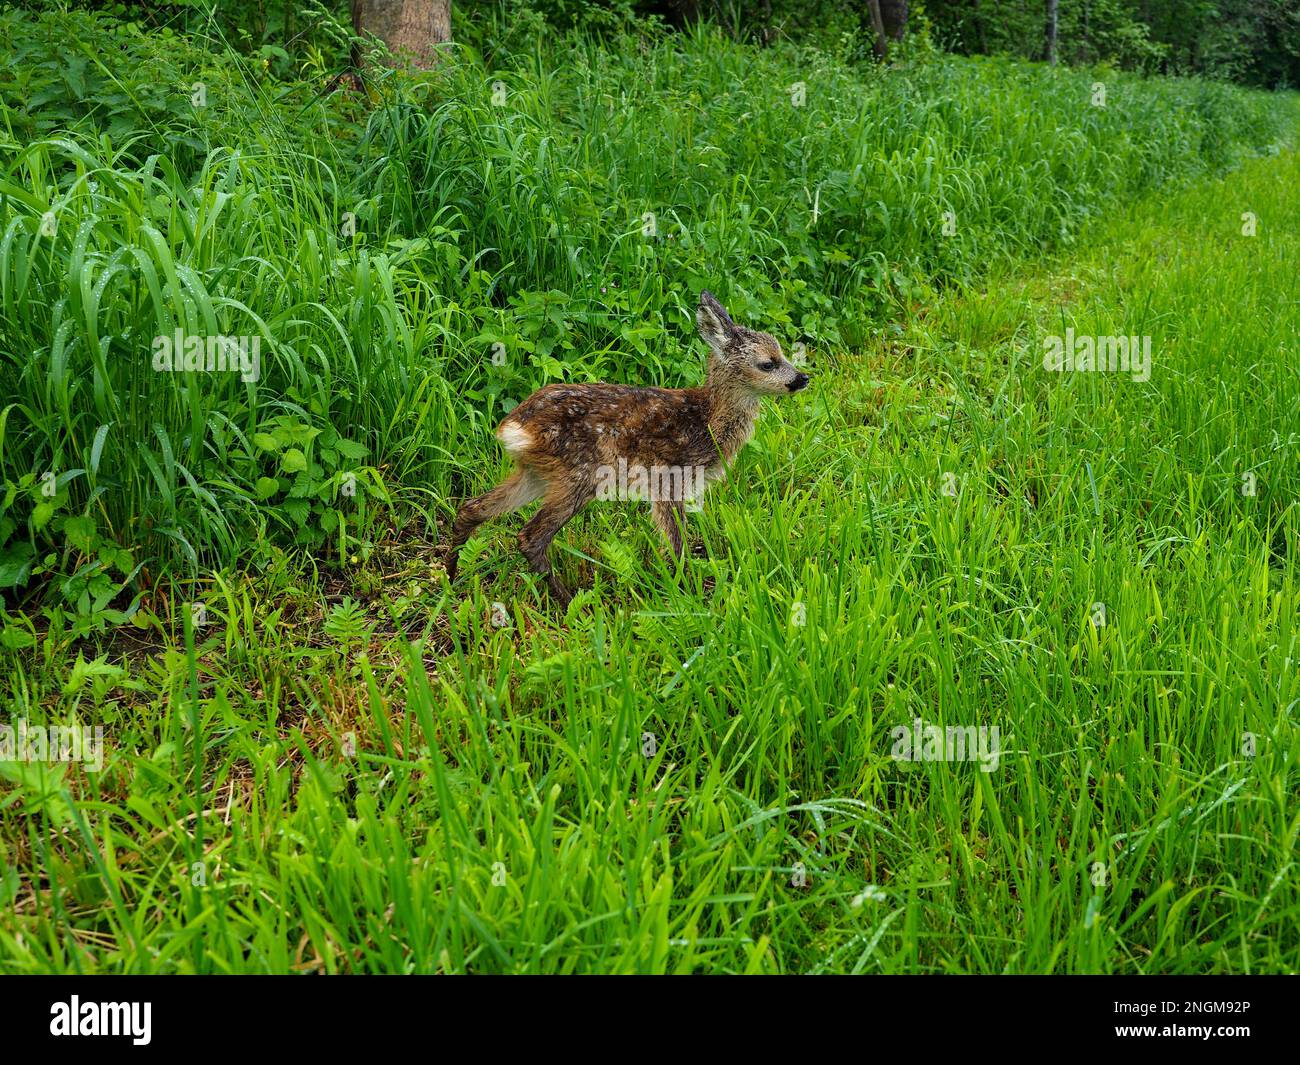 Roe deer fawn (Capreolus capreolus) standing in the grass neer a forest in Bavaria Stock Photo